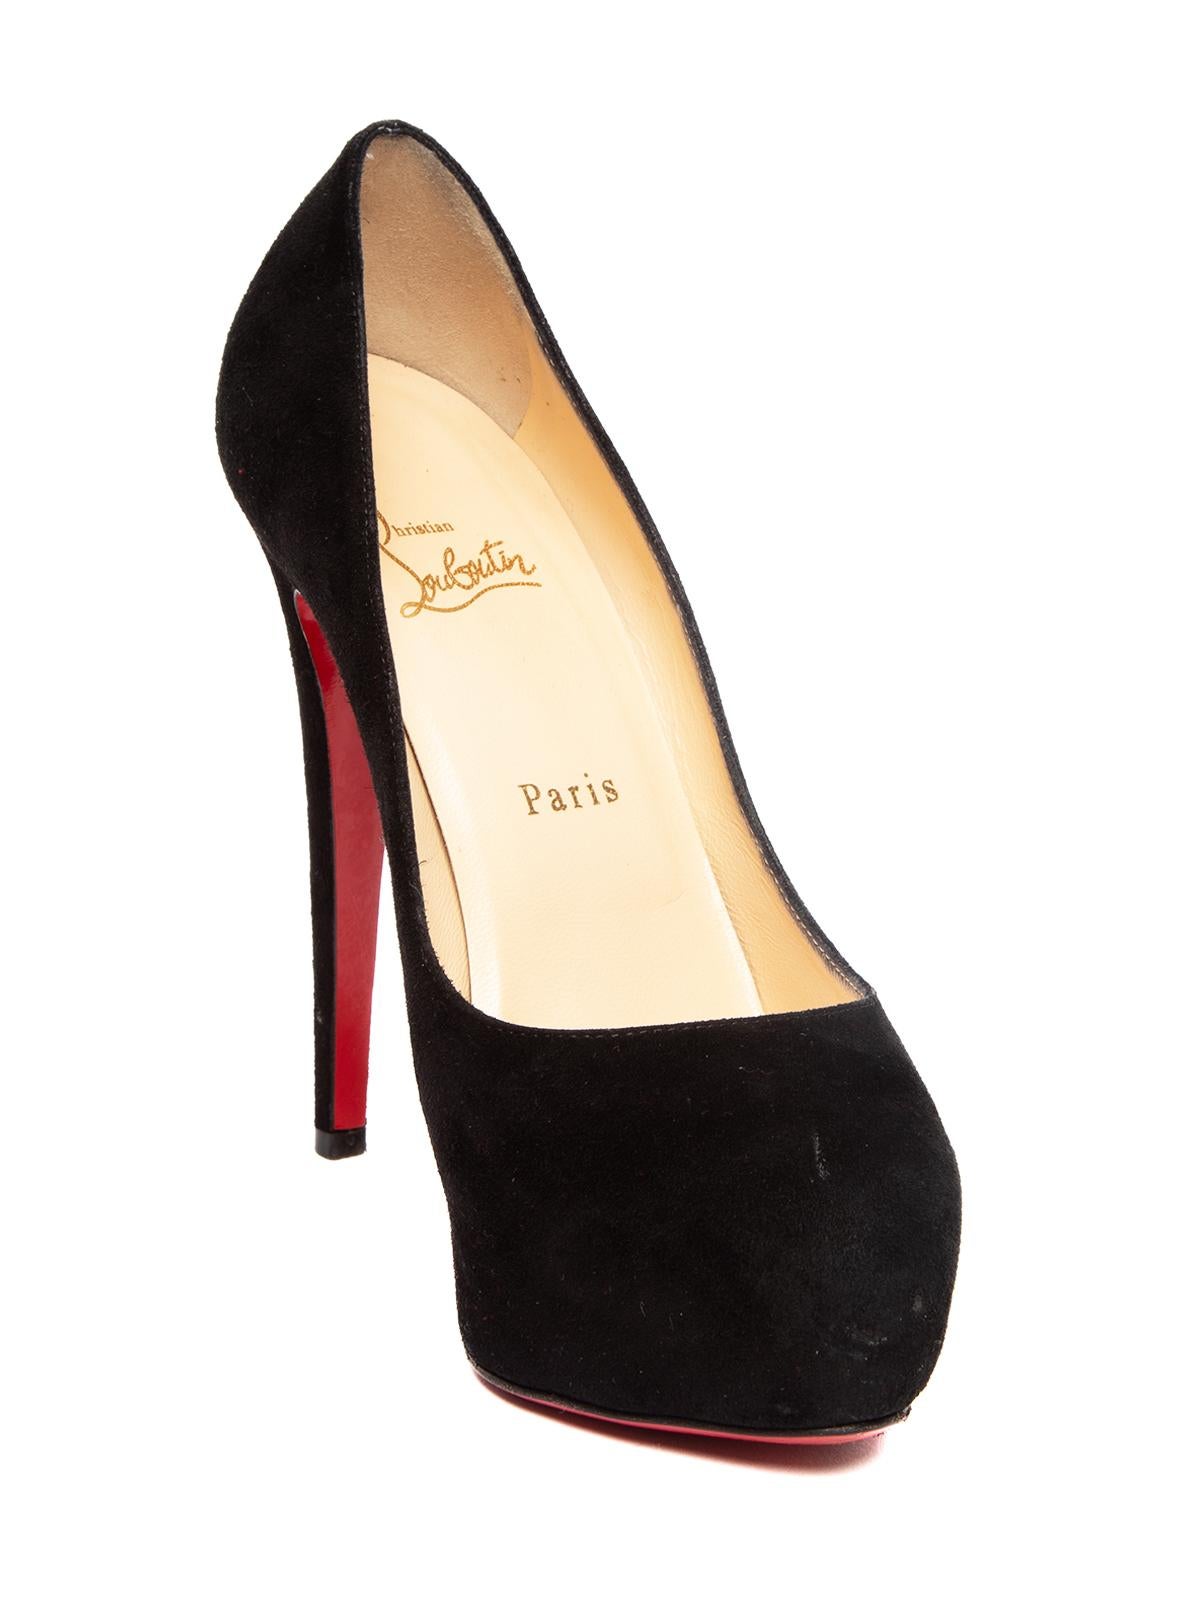 CONDITION is Good. Some wear to shoes is evident. Considerable wear to red outer sole and outer suede around the toes and stiletto heel on this used Christian Louboutin designer resale item. Details Eloise 85 Black Suede Platform Round toe Pump